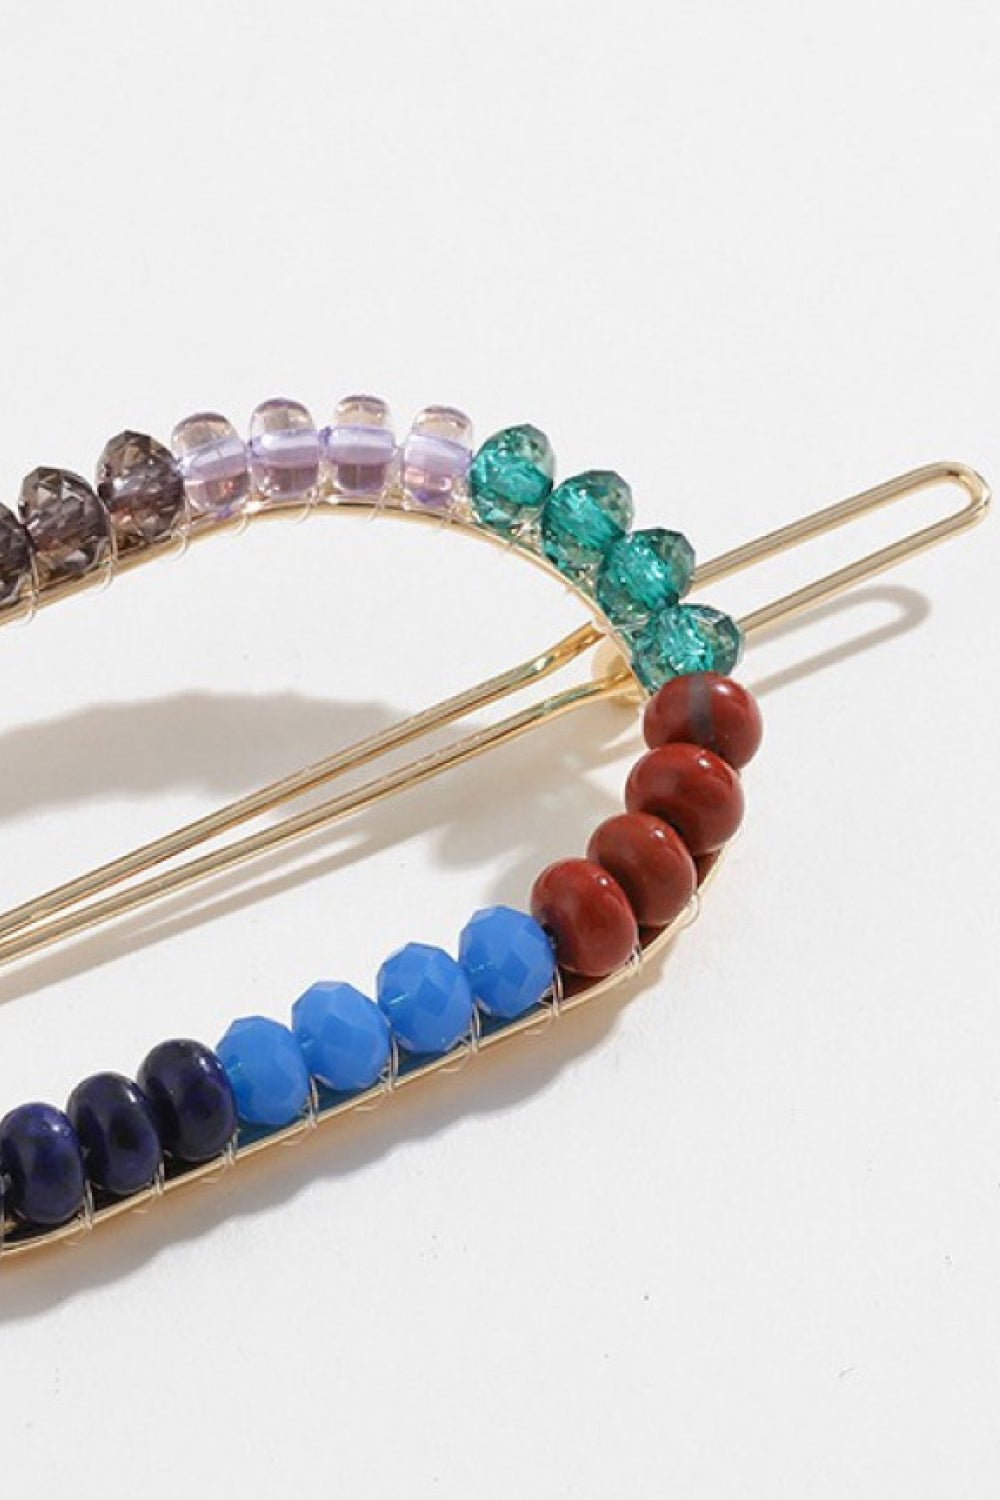 Divine Romance - Embrace Your Inner Goddess with Our Colorful Bead Hair Pin - Effortlessly Complement Any Hairstyle and Indulge in Shimmering Femininity - Guy Christopher